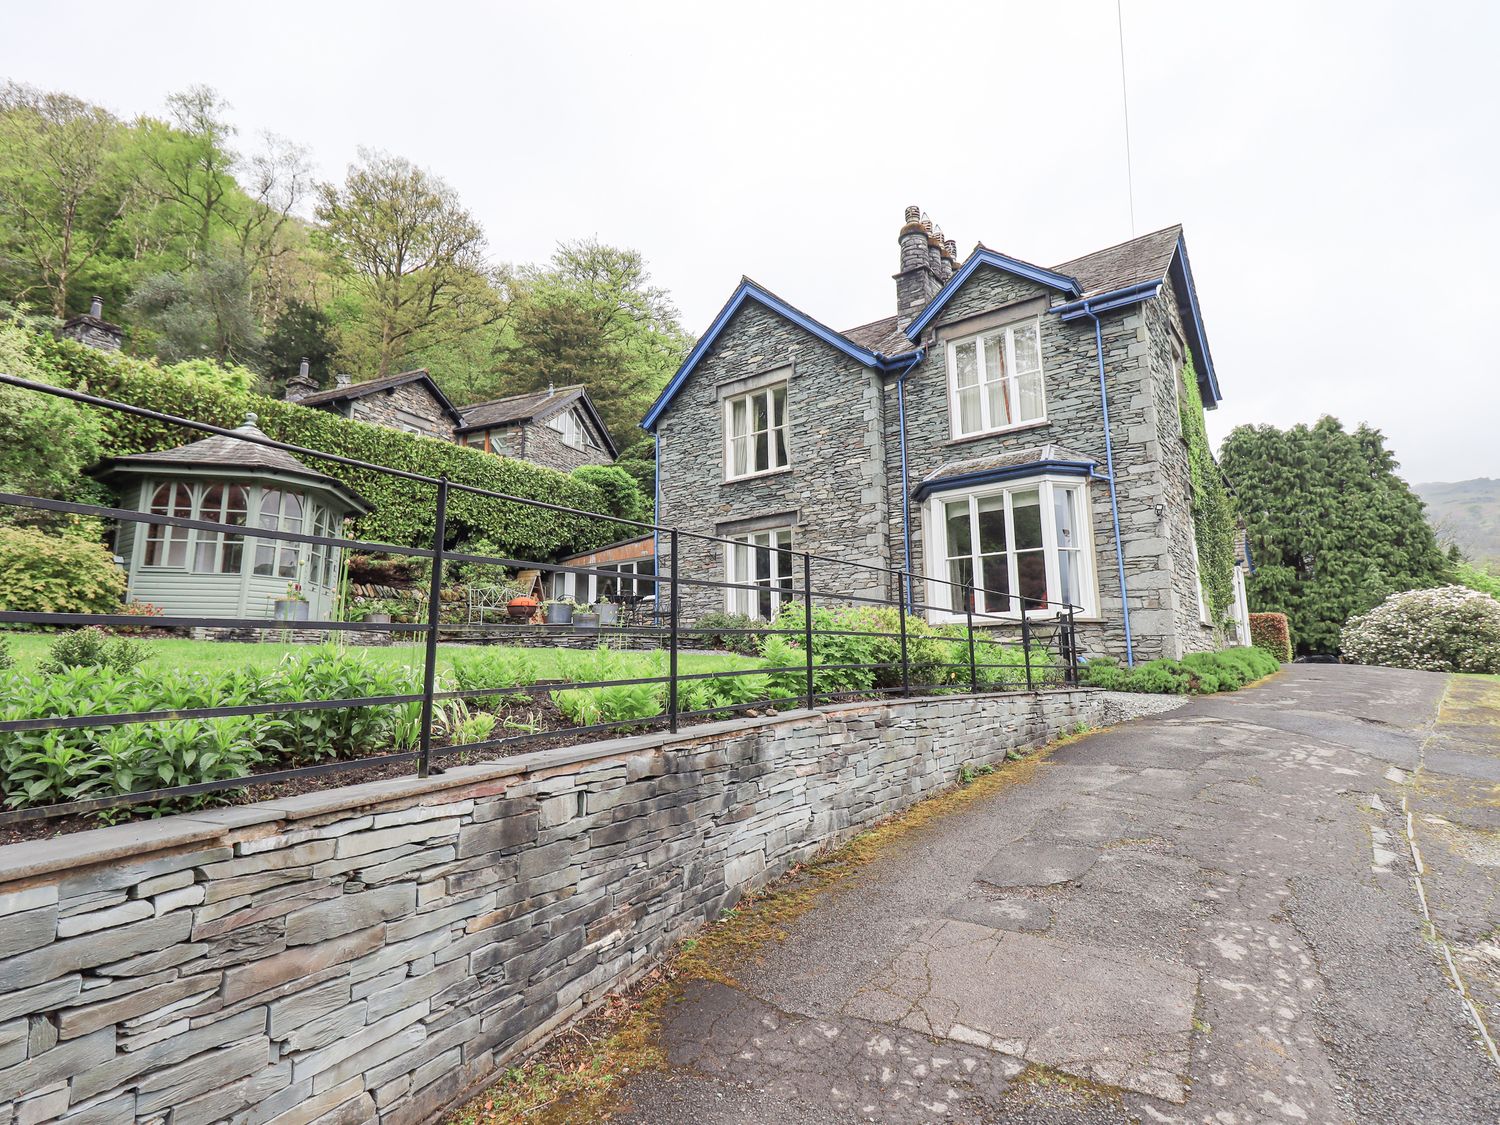 Stepping Stones House - Lake District - 1042257 - photo 1